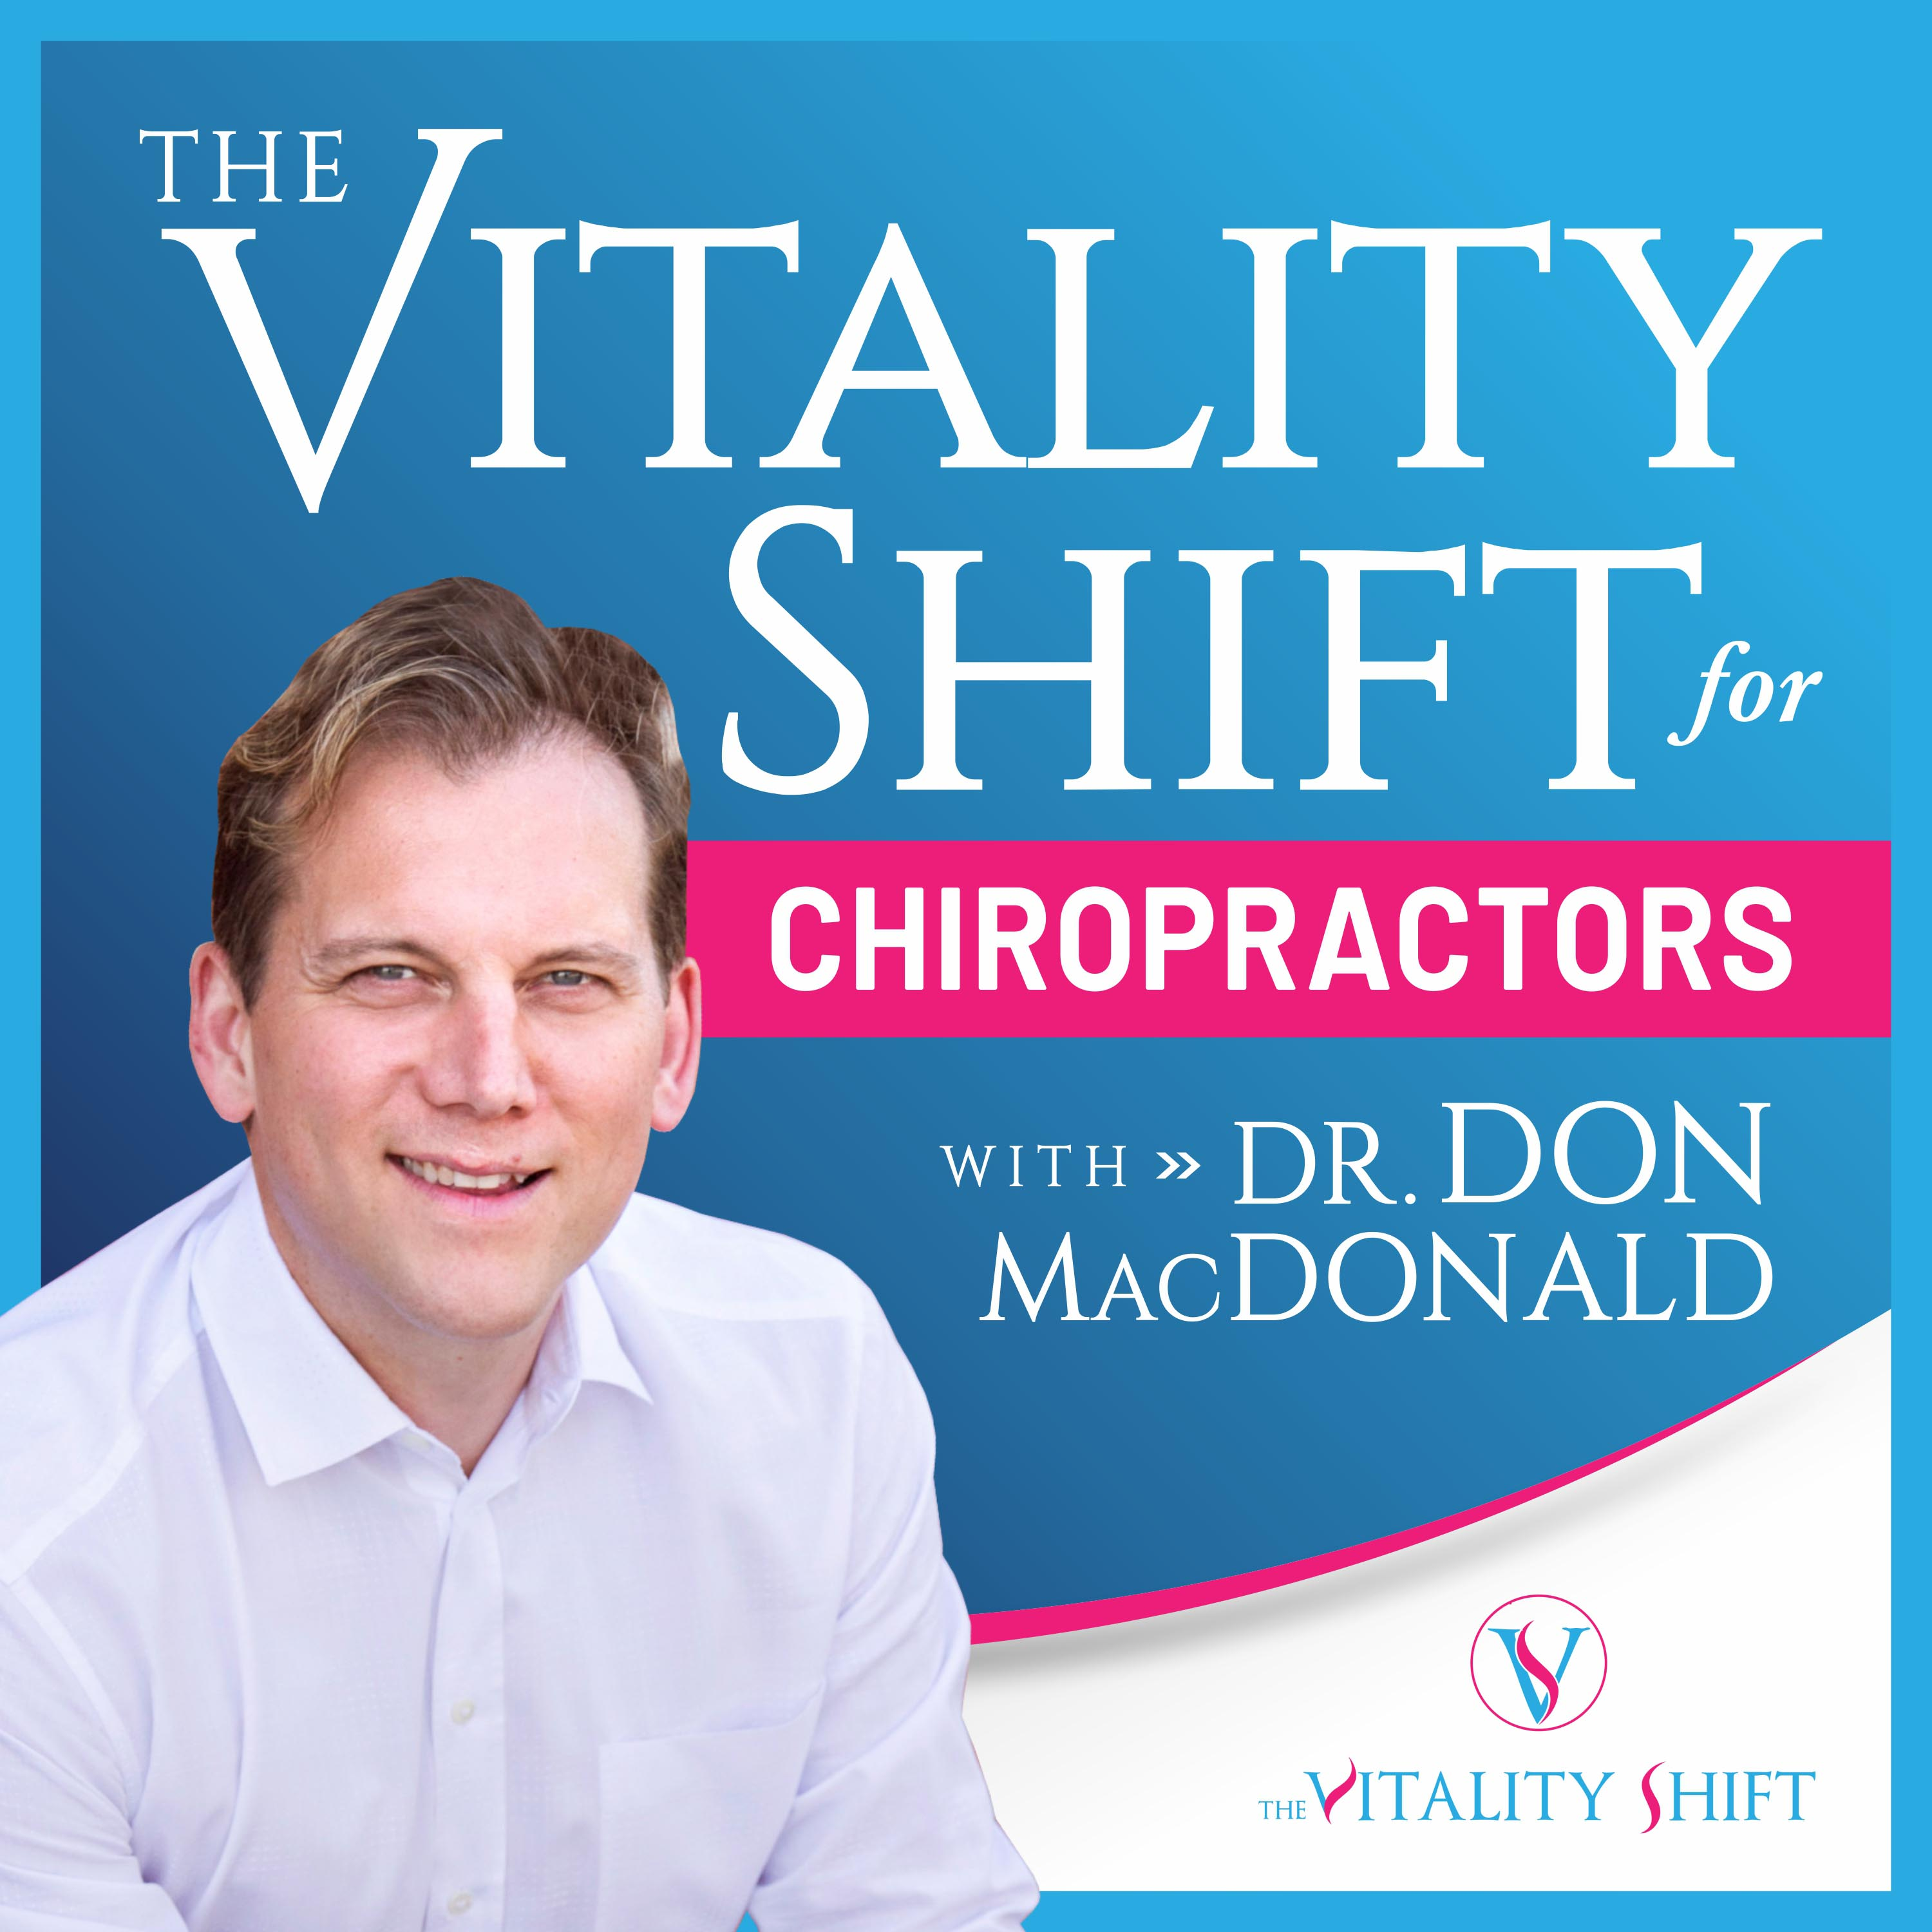 The Vitality Shift for Chiropractors